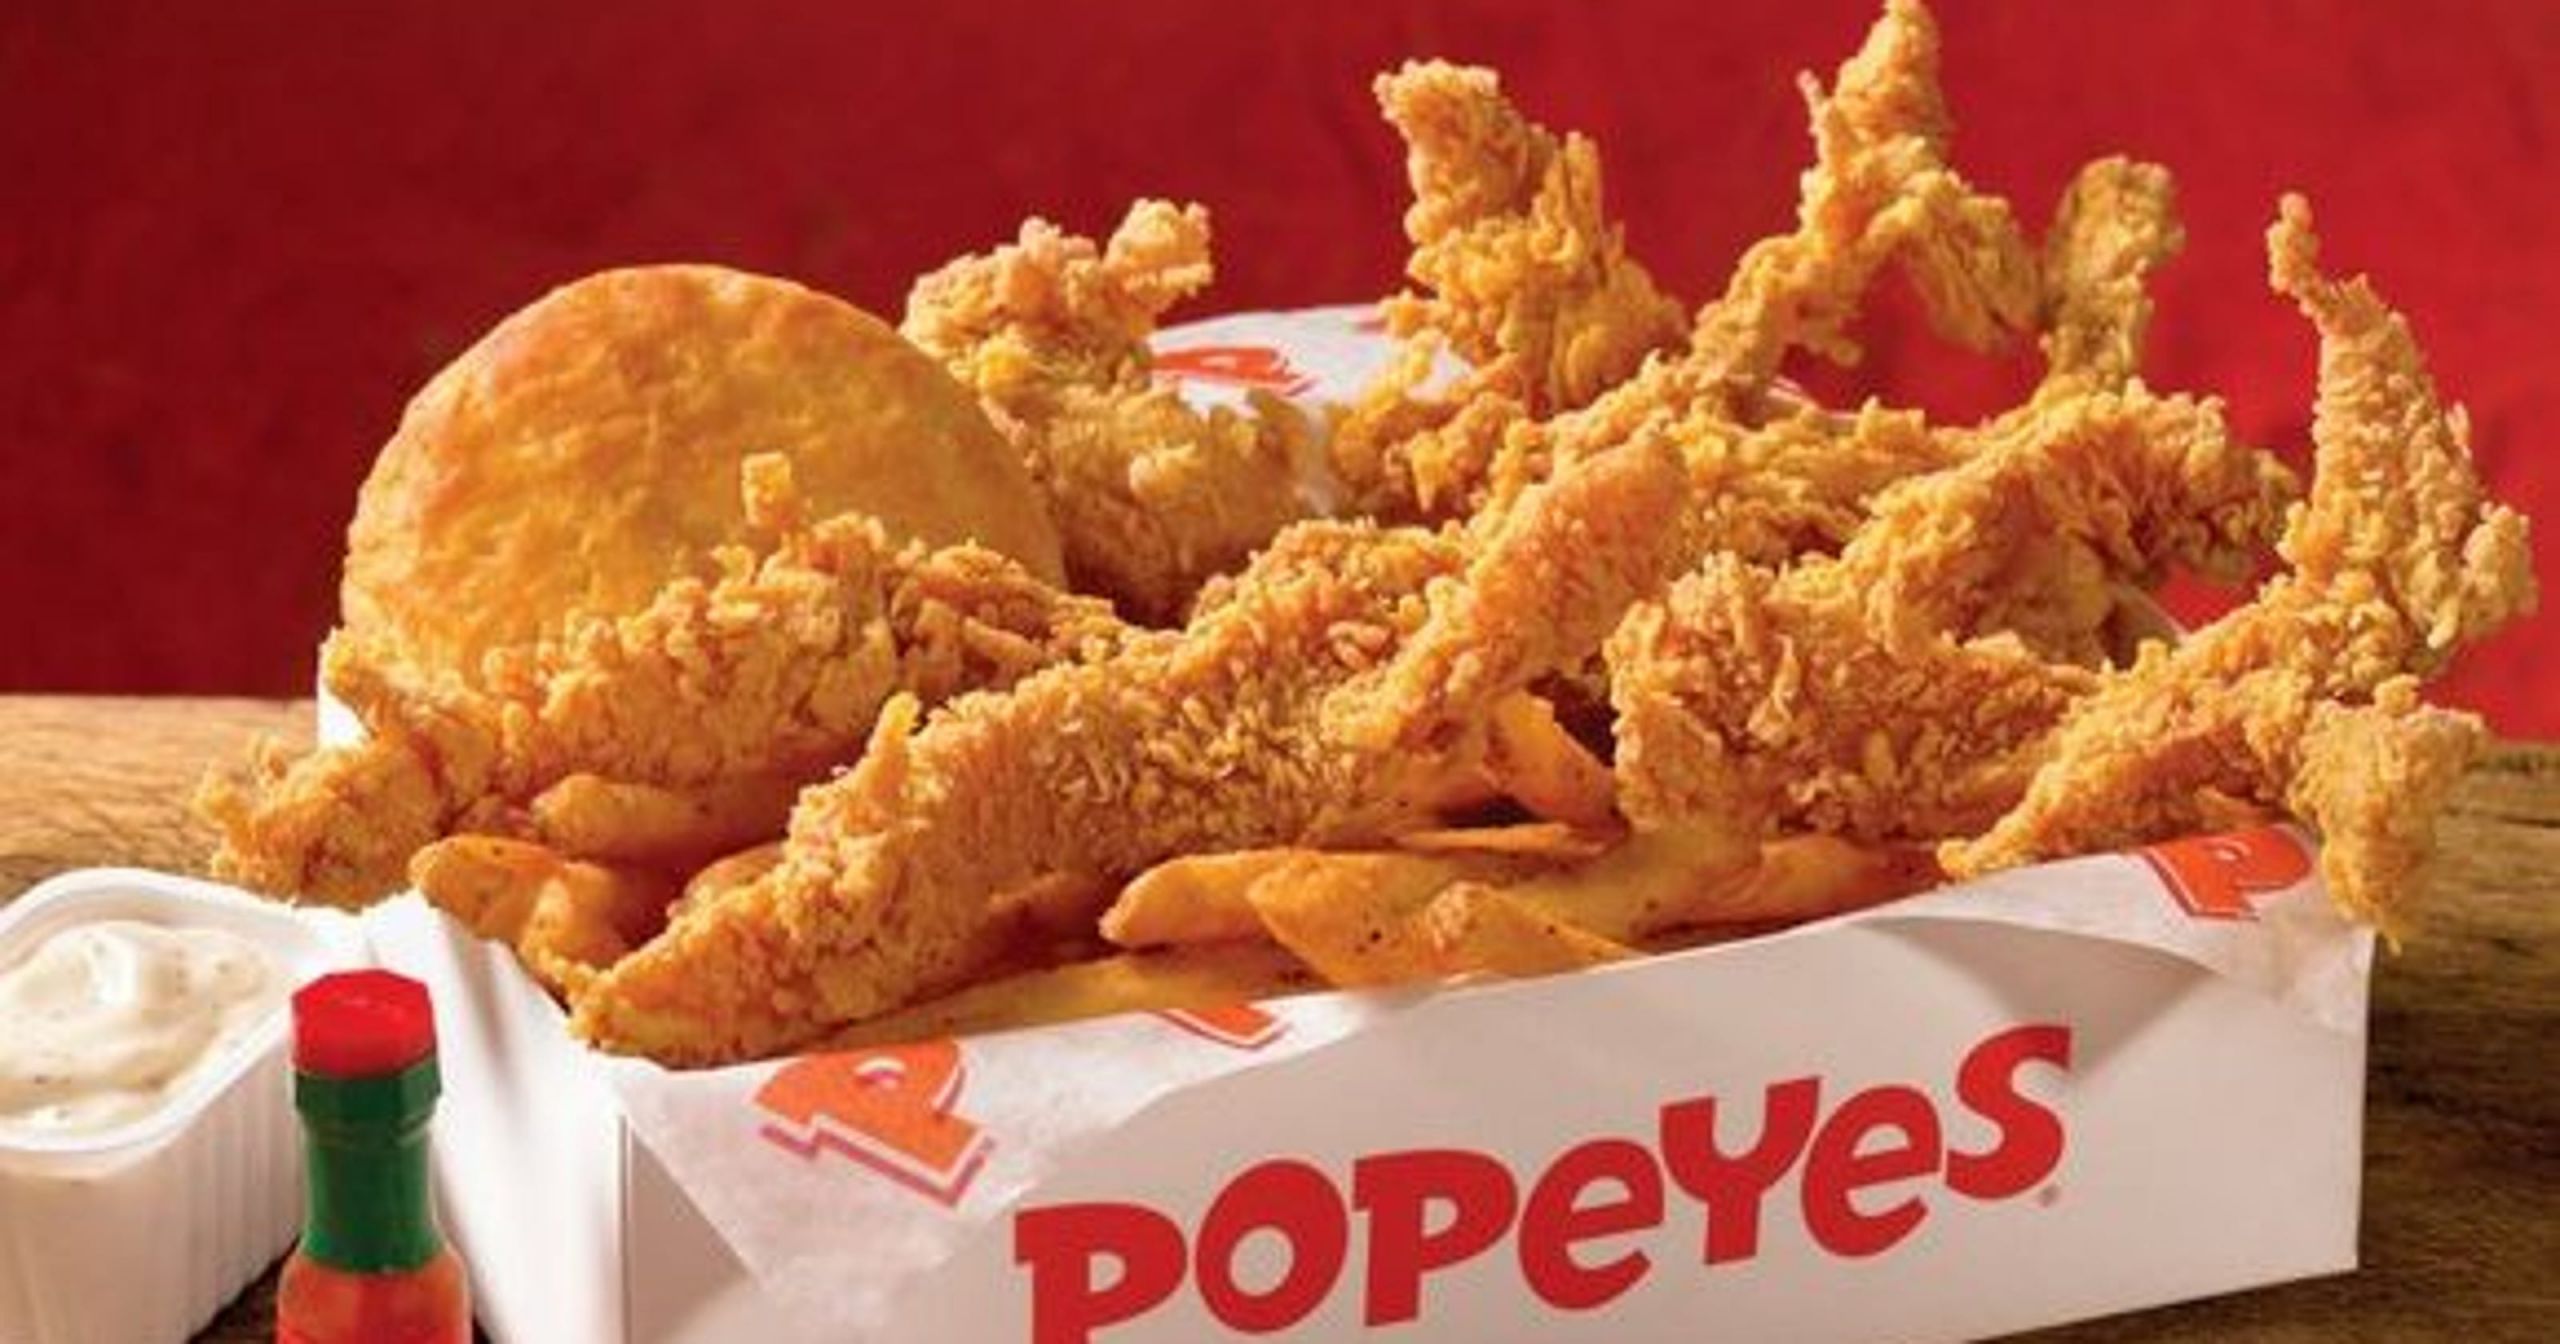 Popeyes Fried Chicken
 Detroit Popeyes closed after filthy conditions exposed